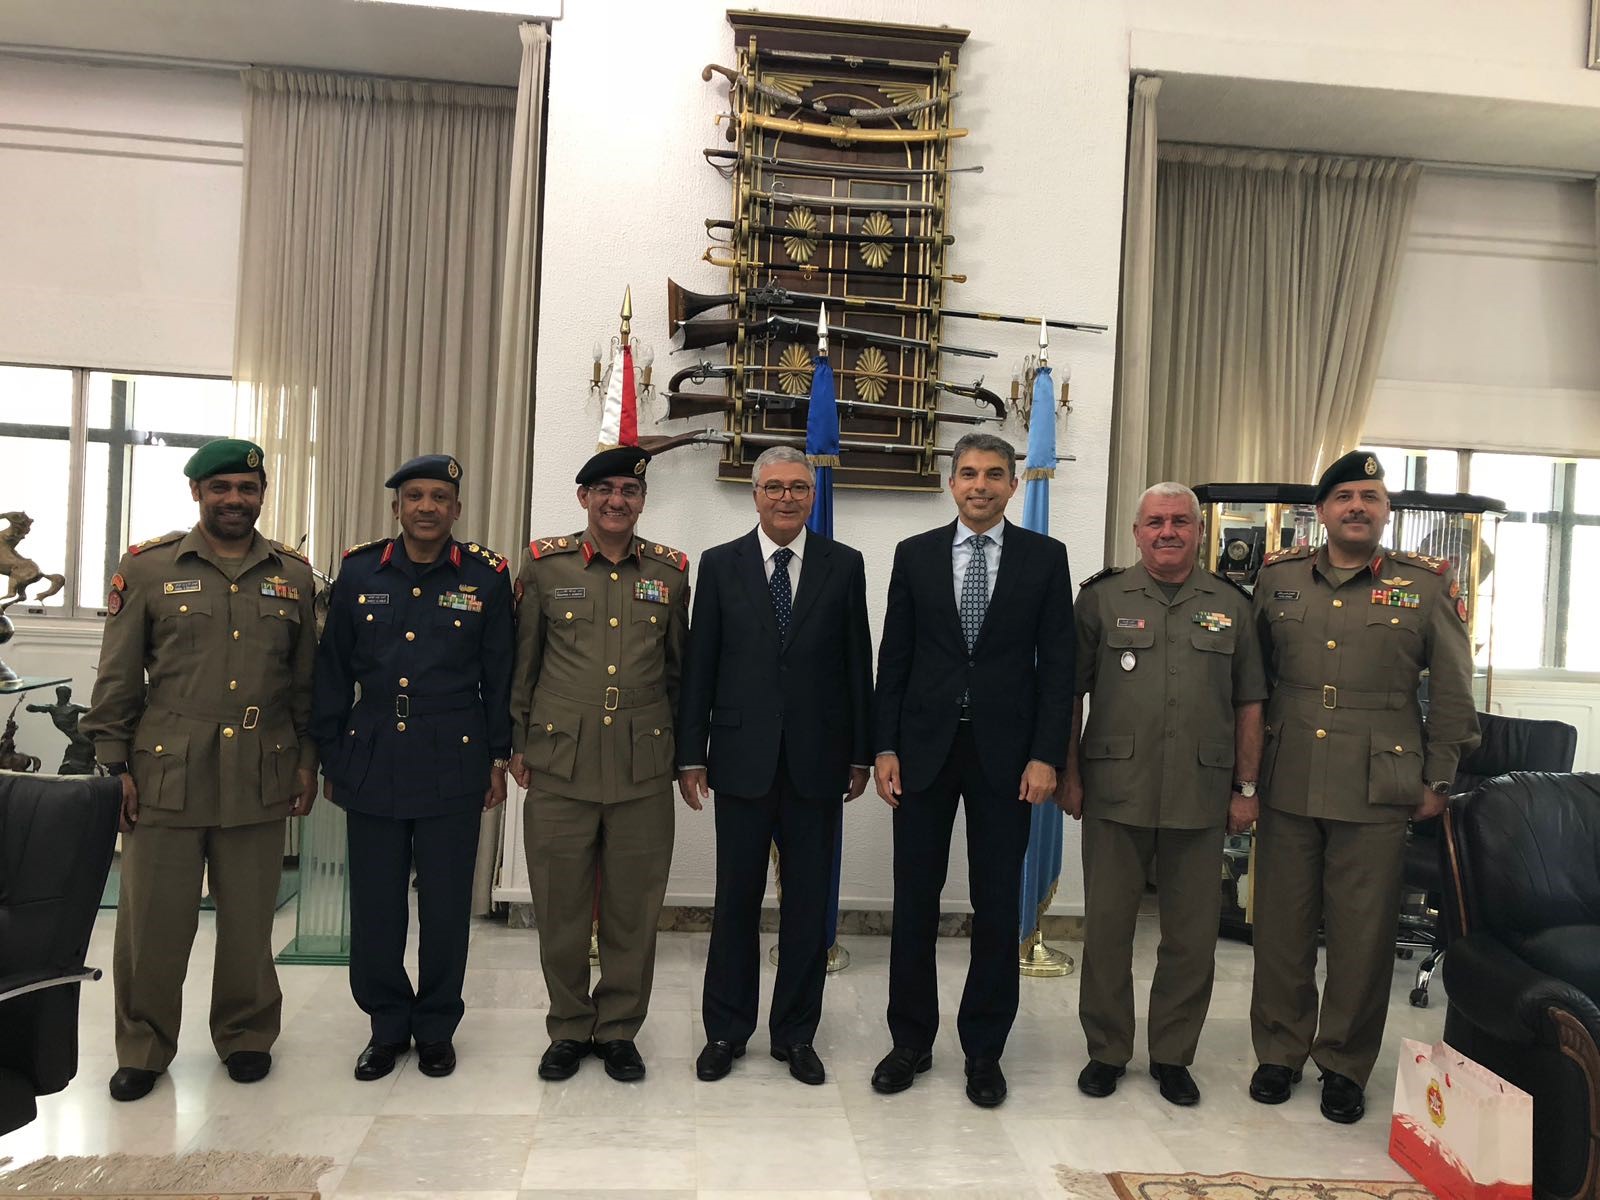 Tunisia's Defence Minister Abdelkarim Zbidi meets with a Kuwaiti official